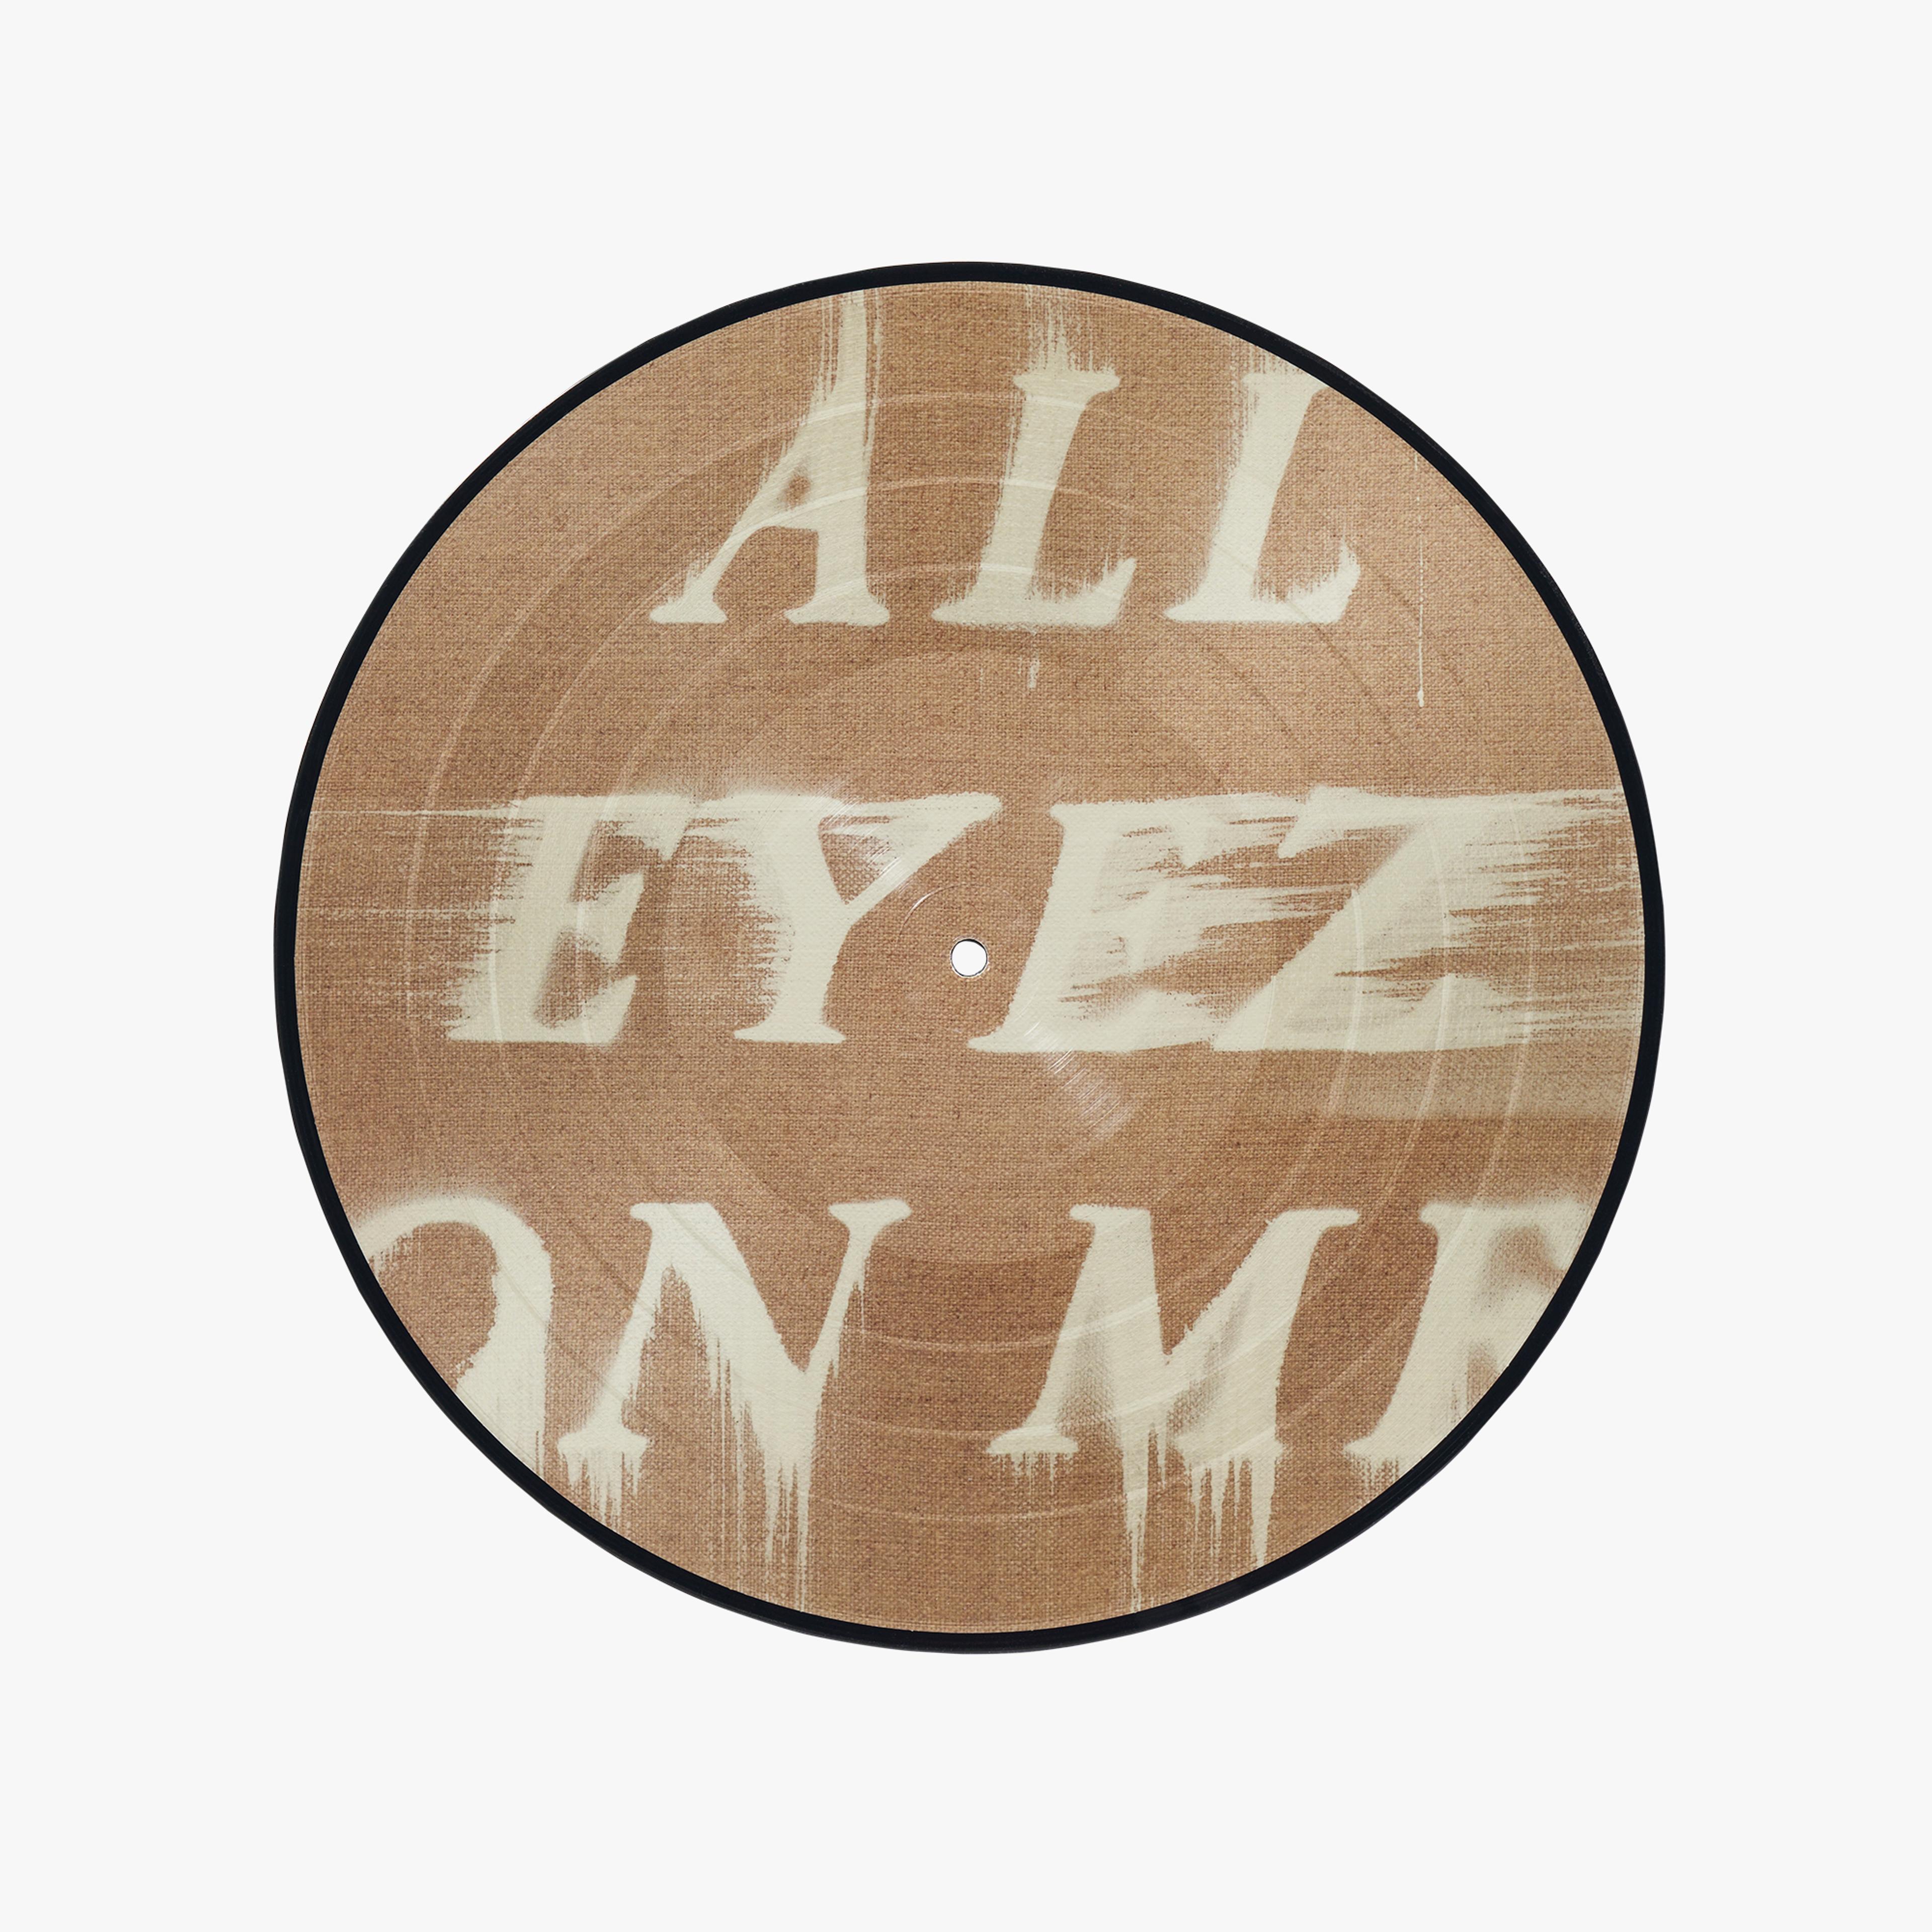 pianist brændstof aktivering NTWRK - 2Pac - All Eyez On Me by Ed Ruscha Gallery Picture Disc